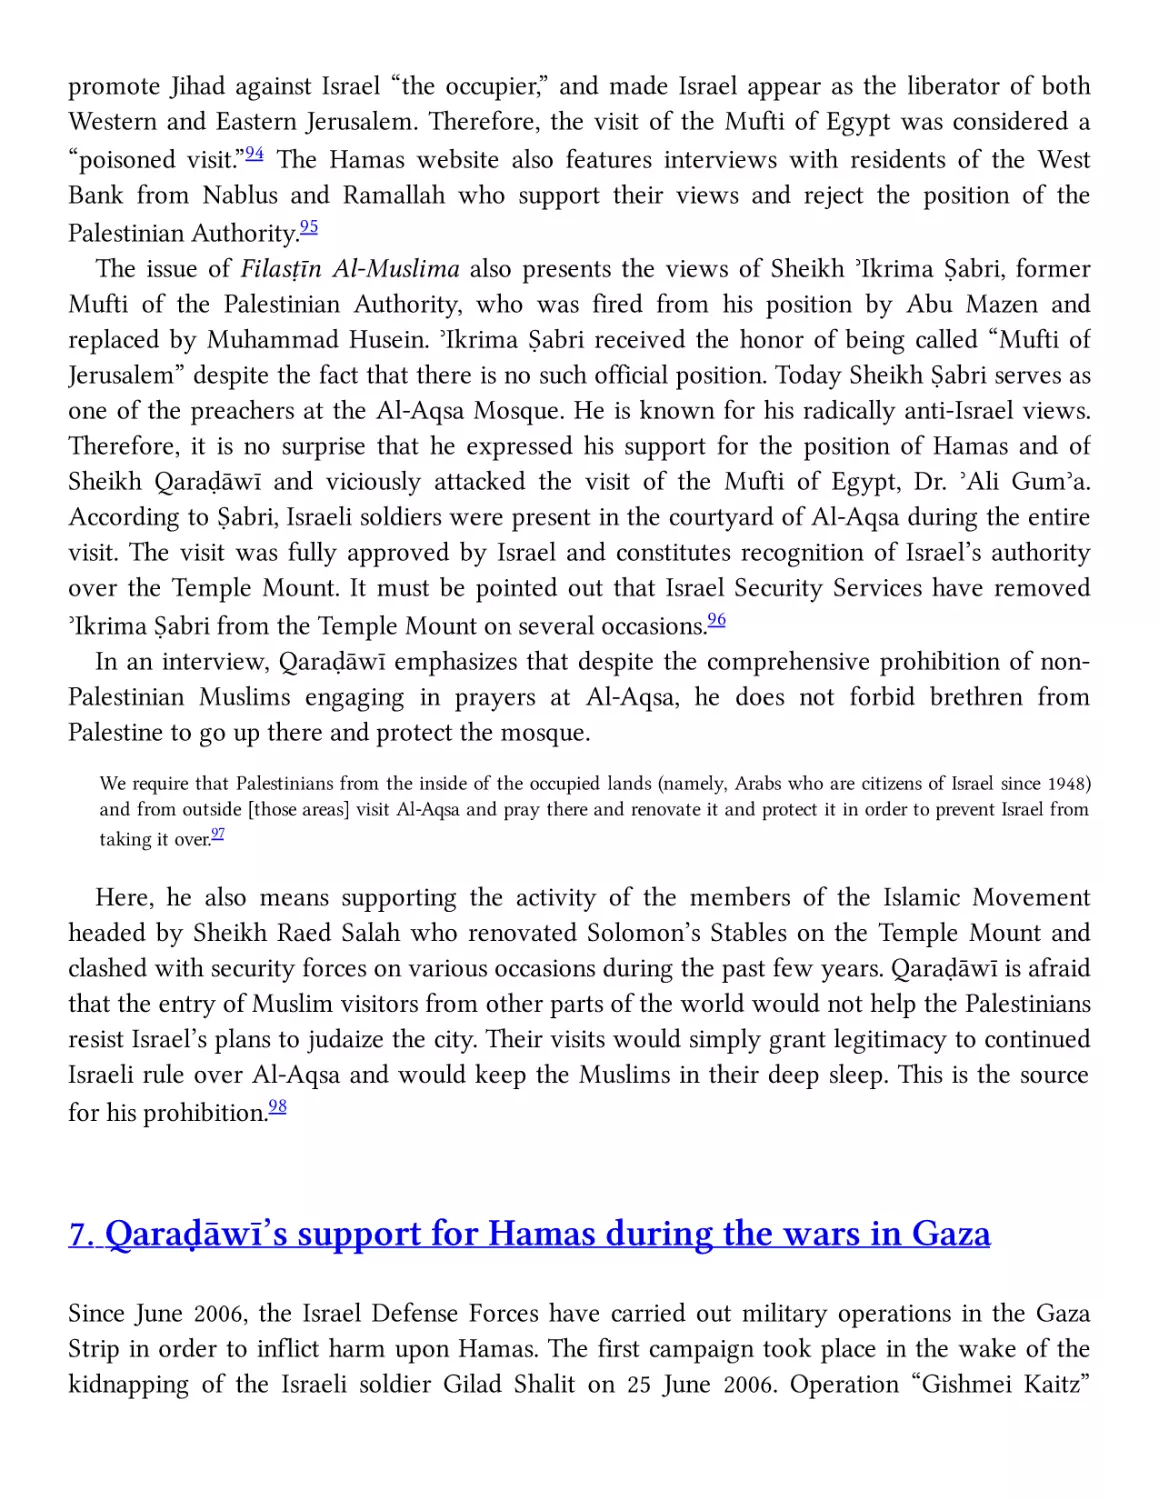 7. QaraḊāwī’s support for Hamas during the wars in Gaza